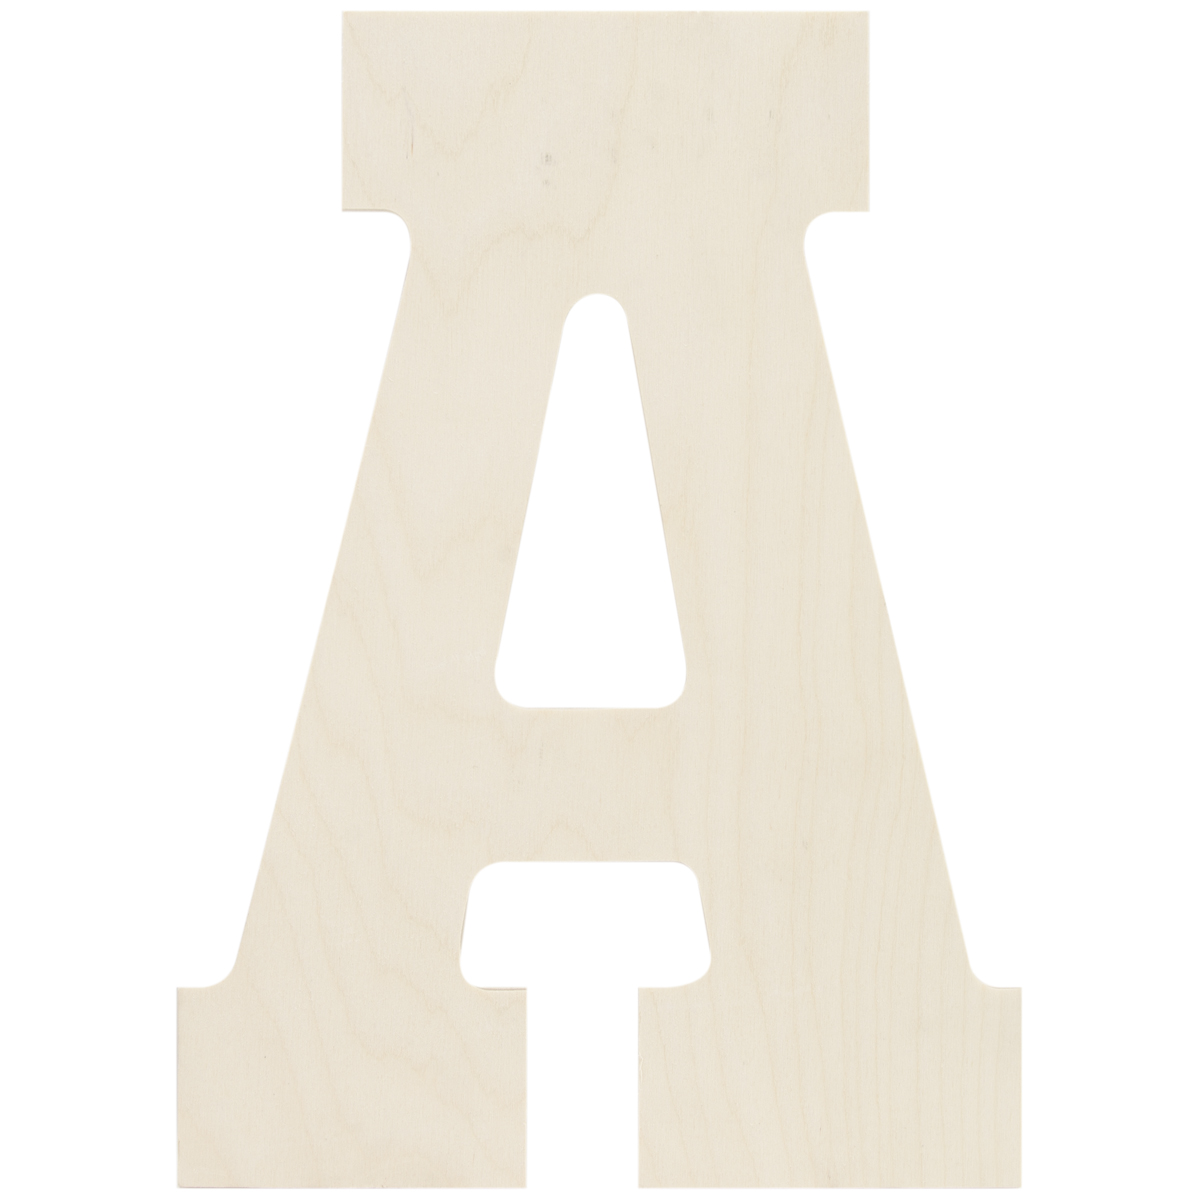 MPI WOOD PRODUCTS Baltic Birch Collegiate Font Letters and Numbers, 13.5" - image 1 of 2